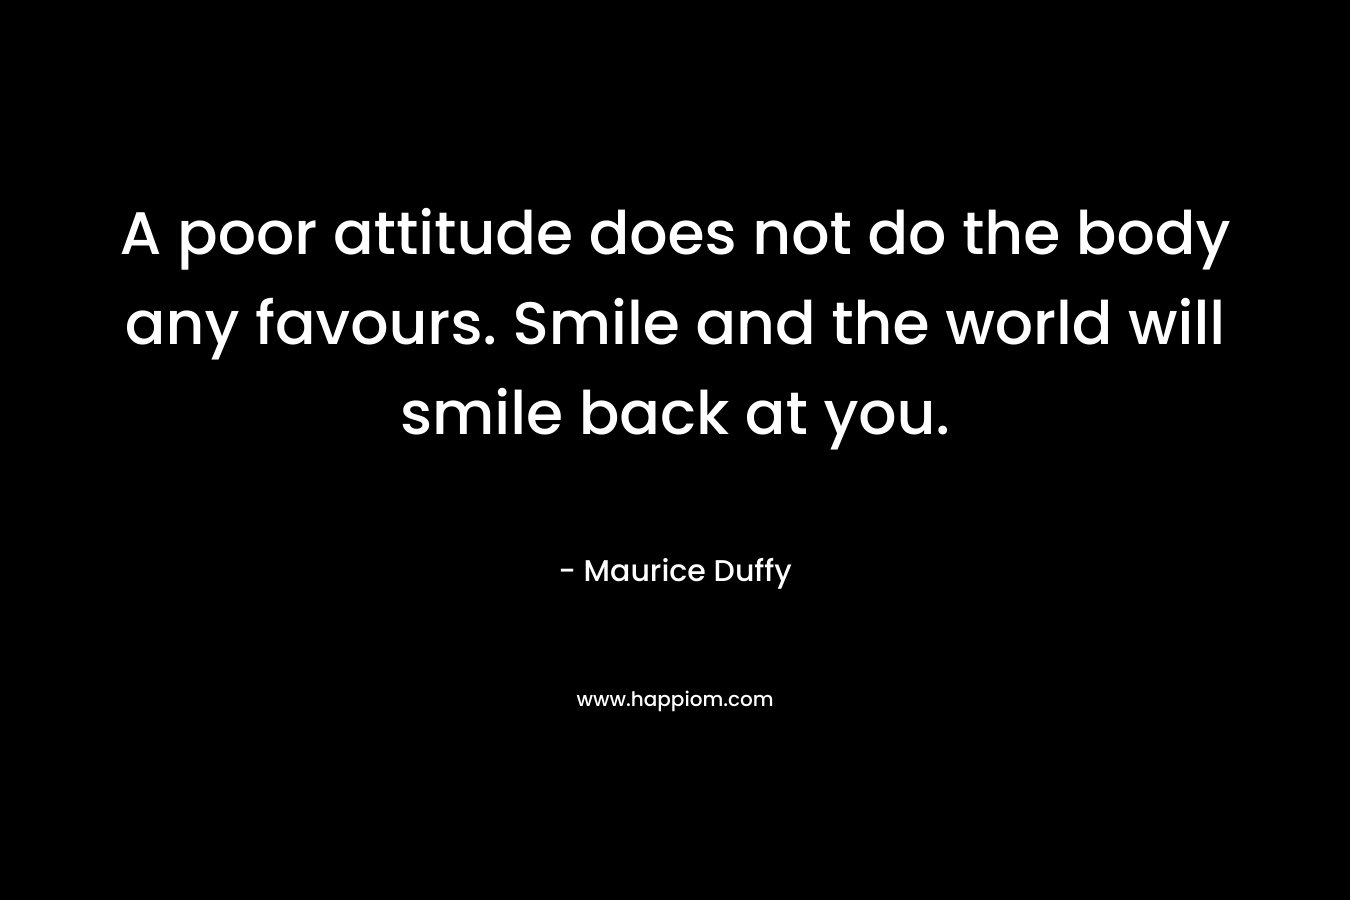 A poor attitude does not do the body any favours. Smile and the world will smile back at you. – Maurice Duffy